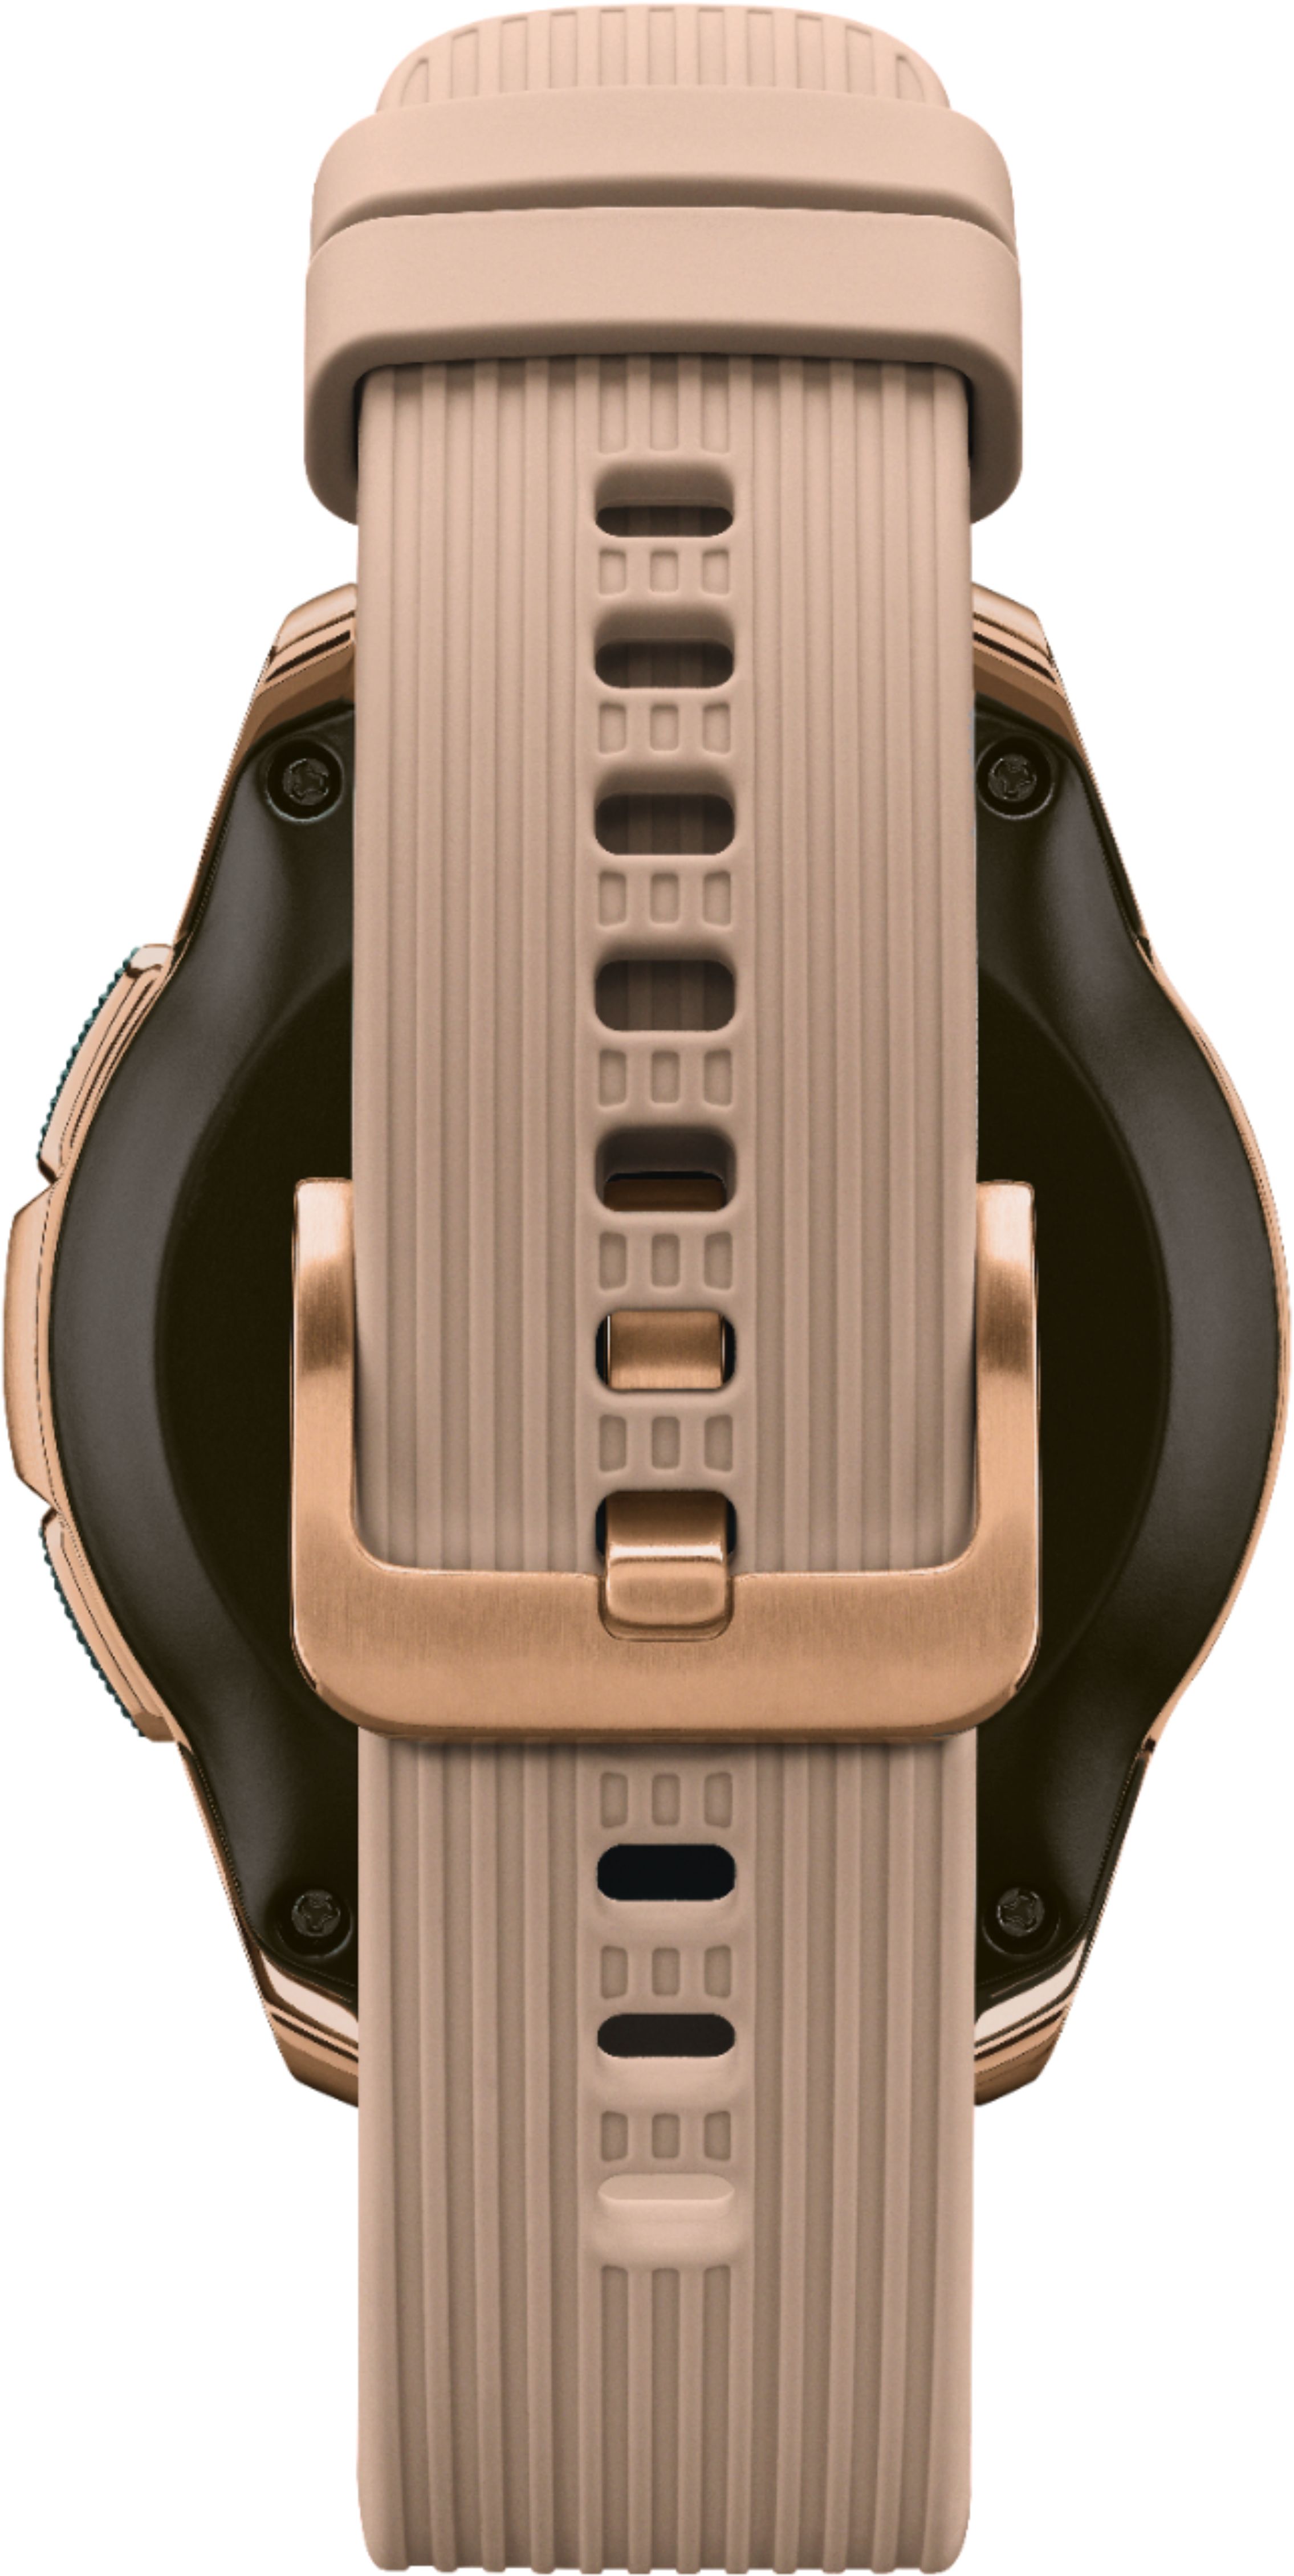 Back View: Samsung - Urban Dress Leather Watch Band for Galaxy Watch 42mm, Active and Active 2 - Tan